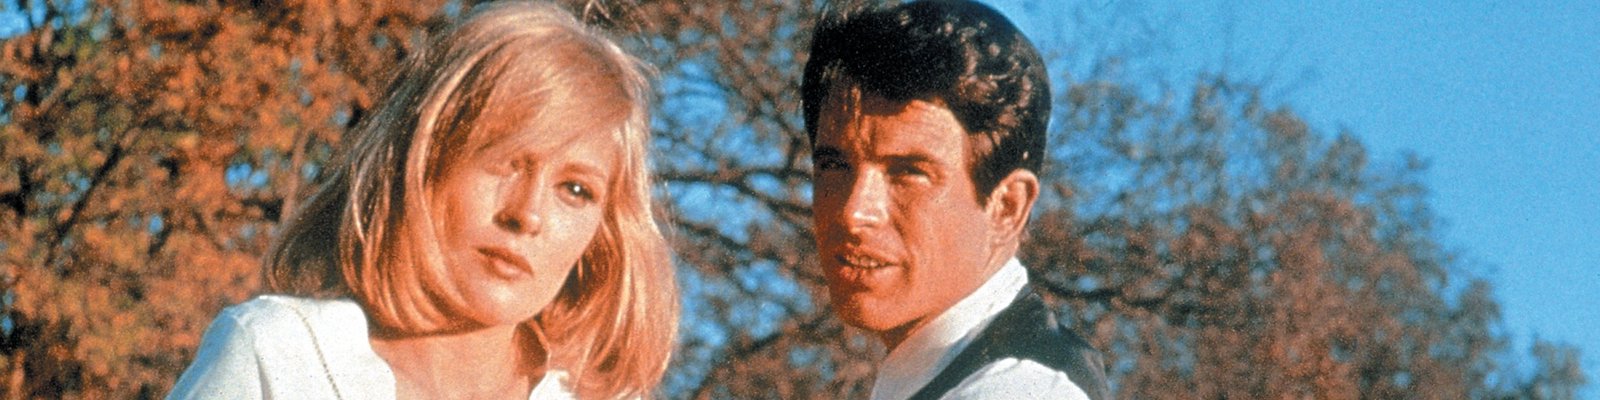 Faye Dunaway and Warren Beatty as Bonnie and Clyde pose outdoors in front of trees